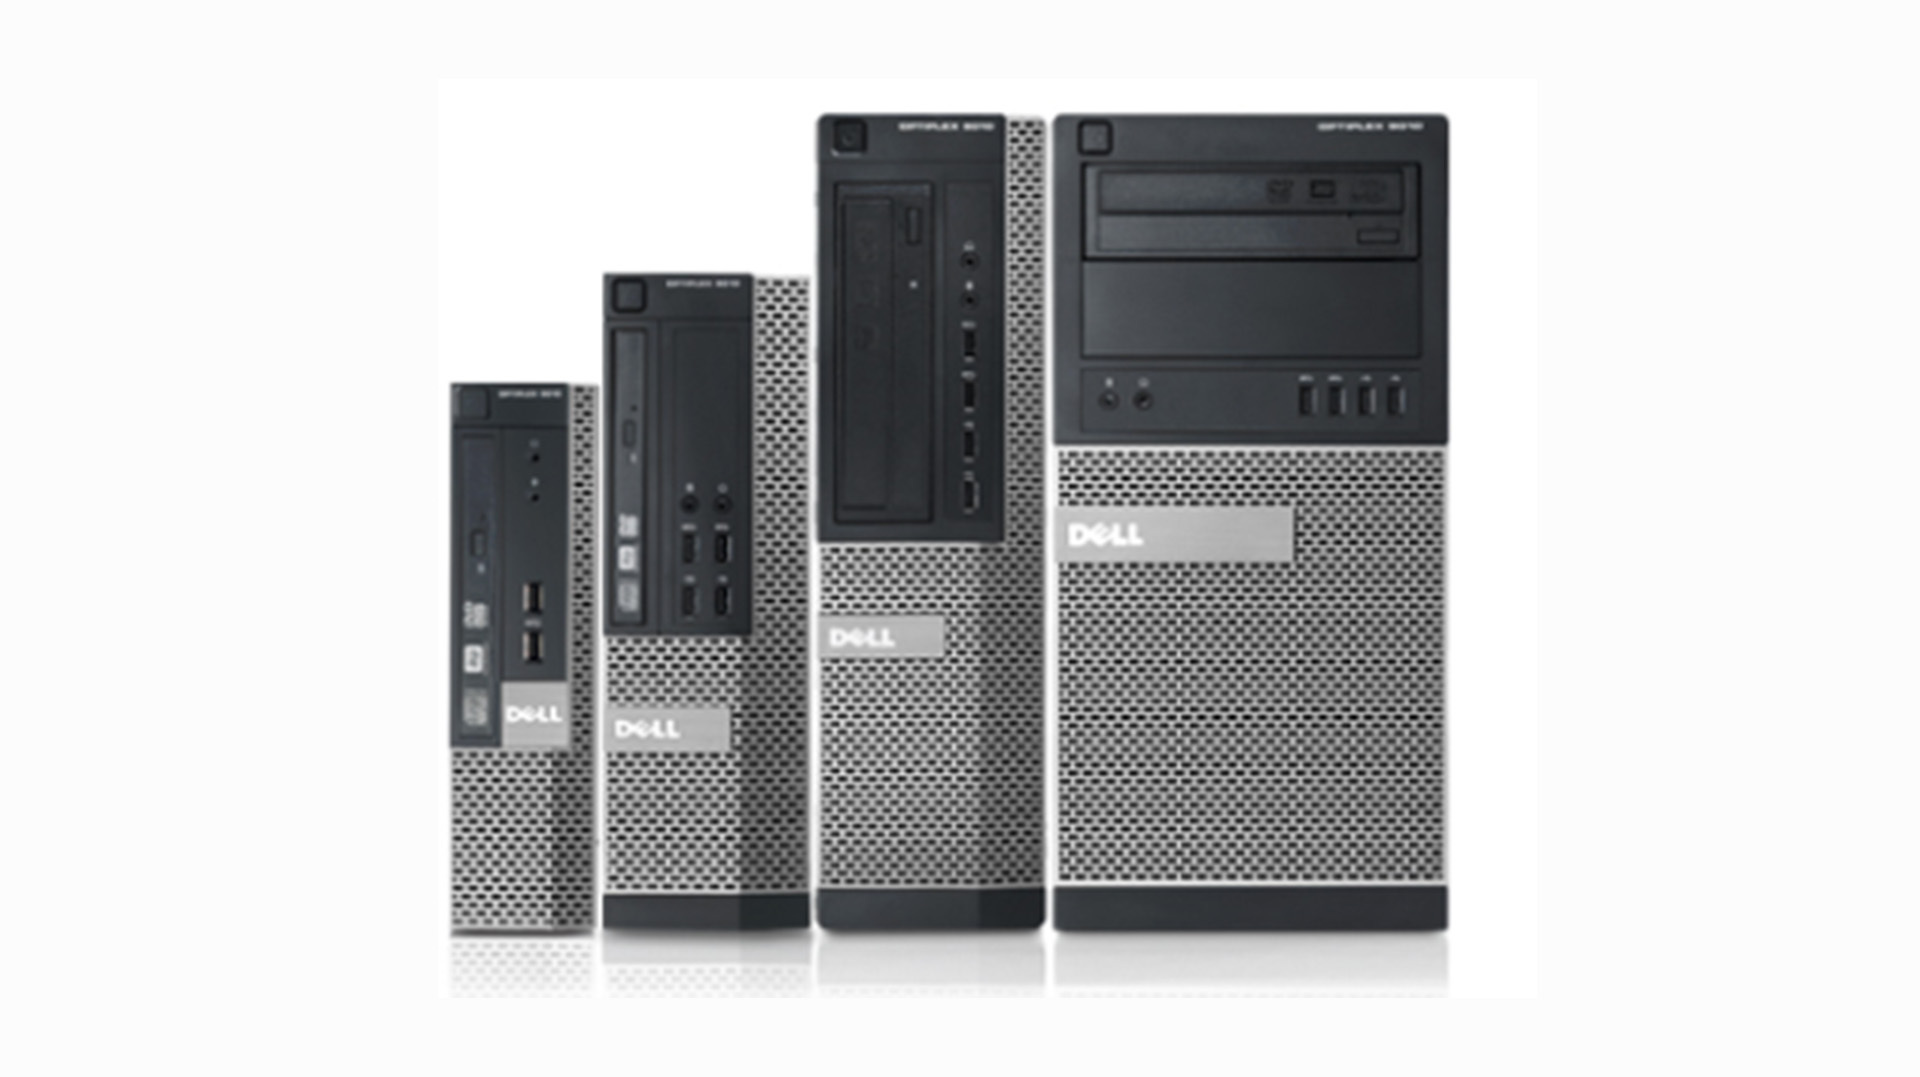 Dell OptiPlex 9020 SFF: Specs and Rack Compatibility - RackSolutions